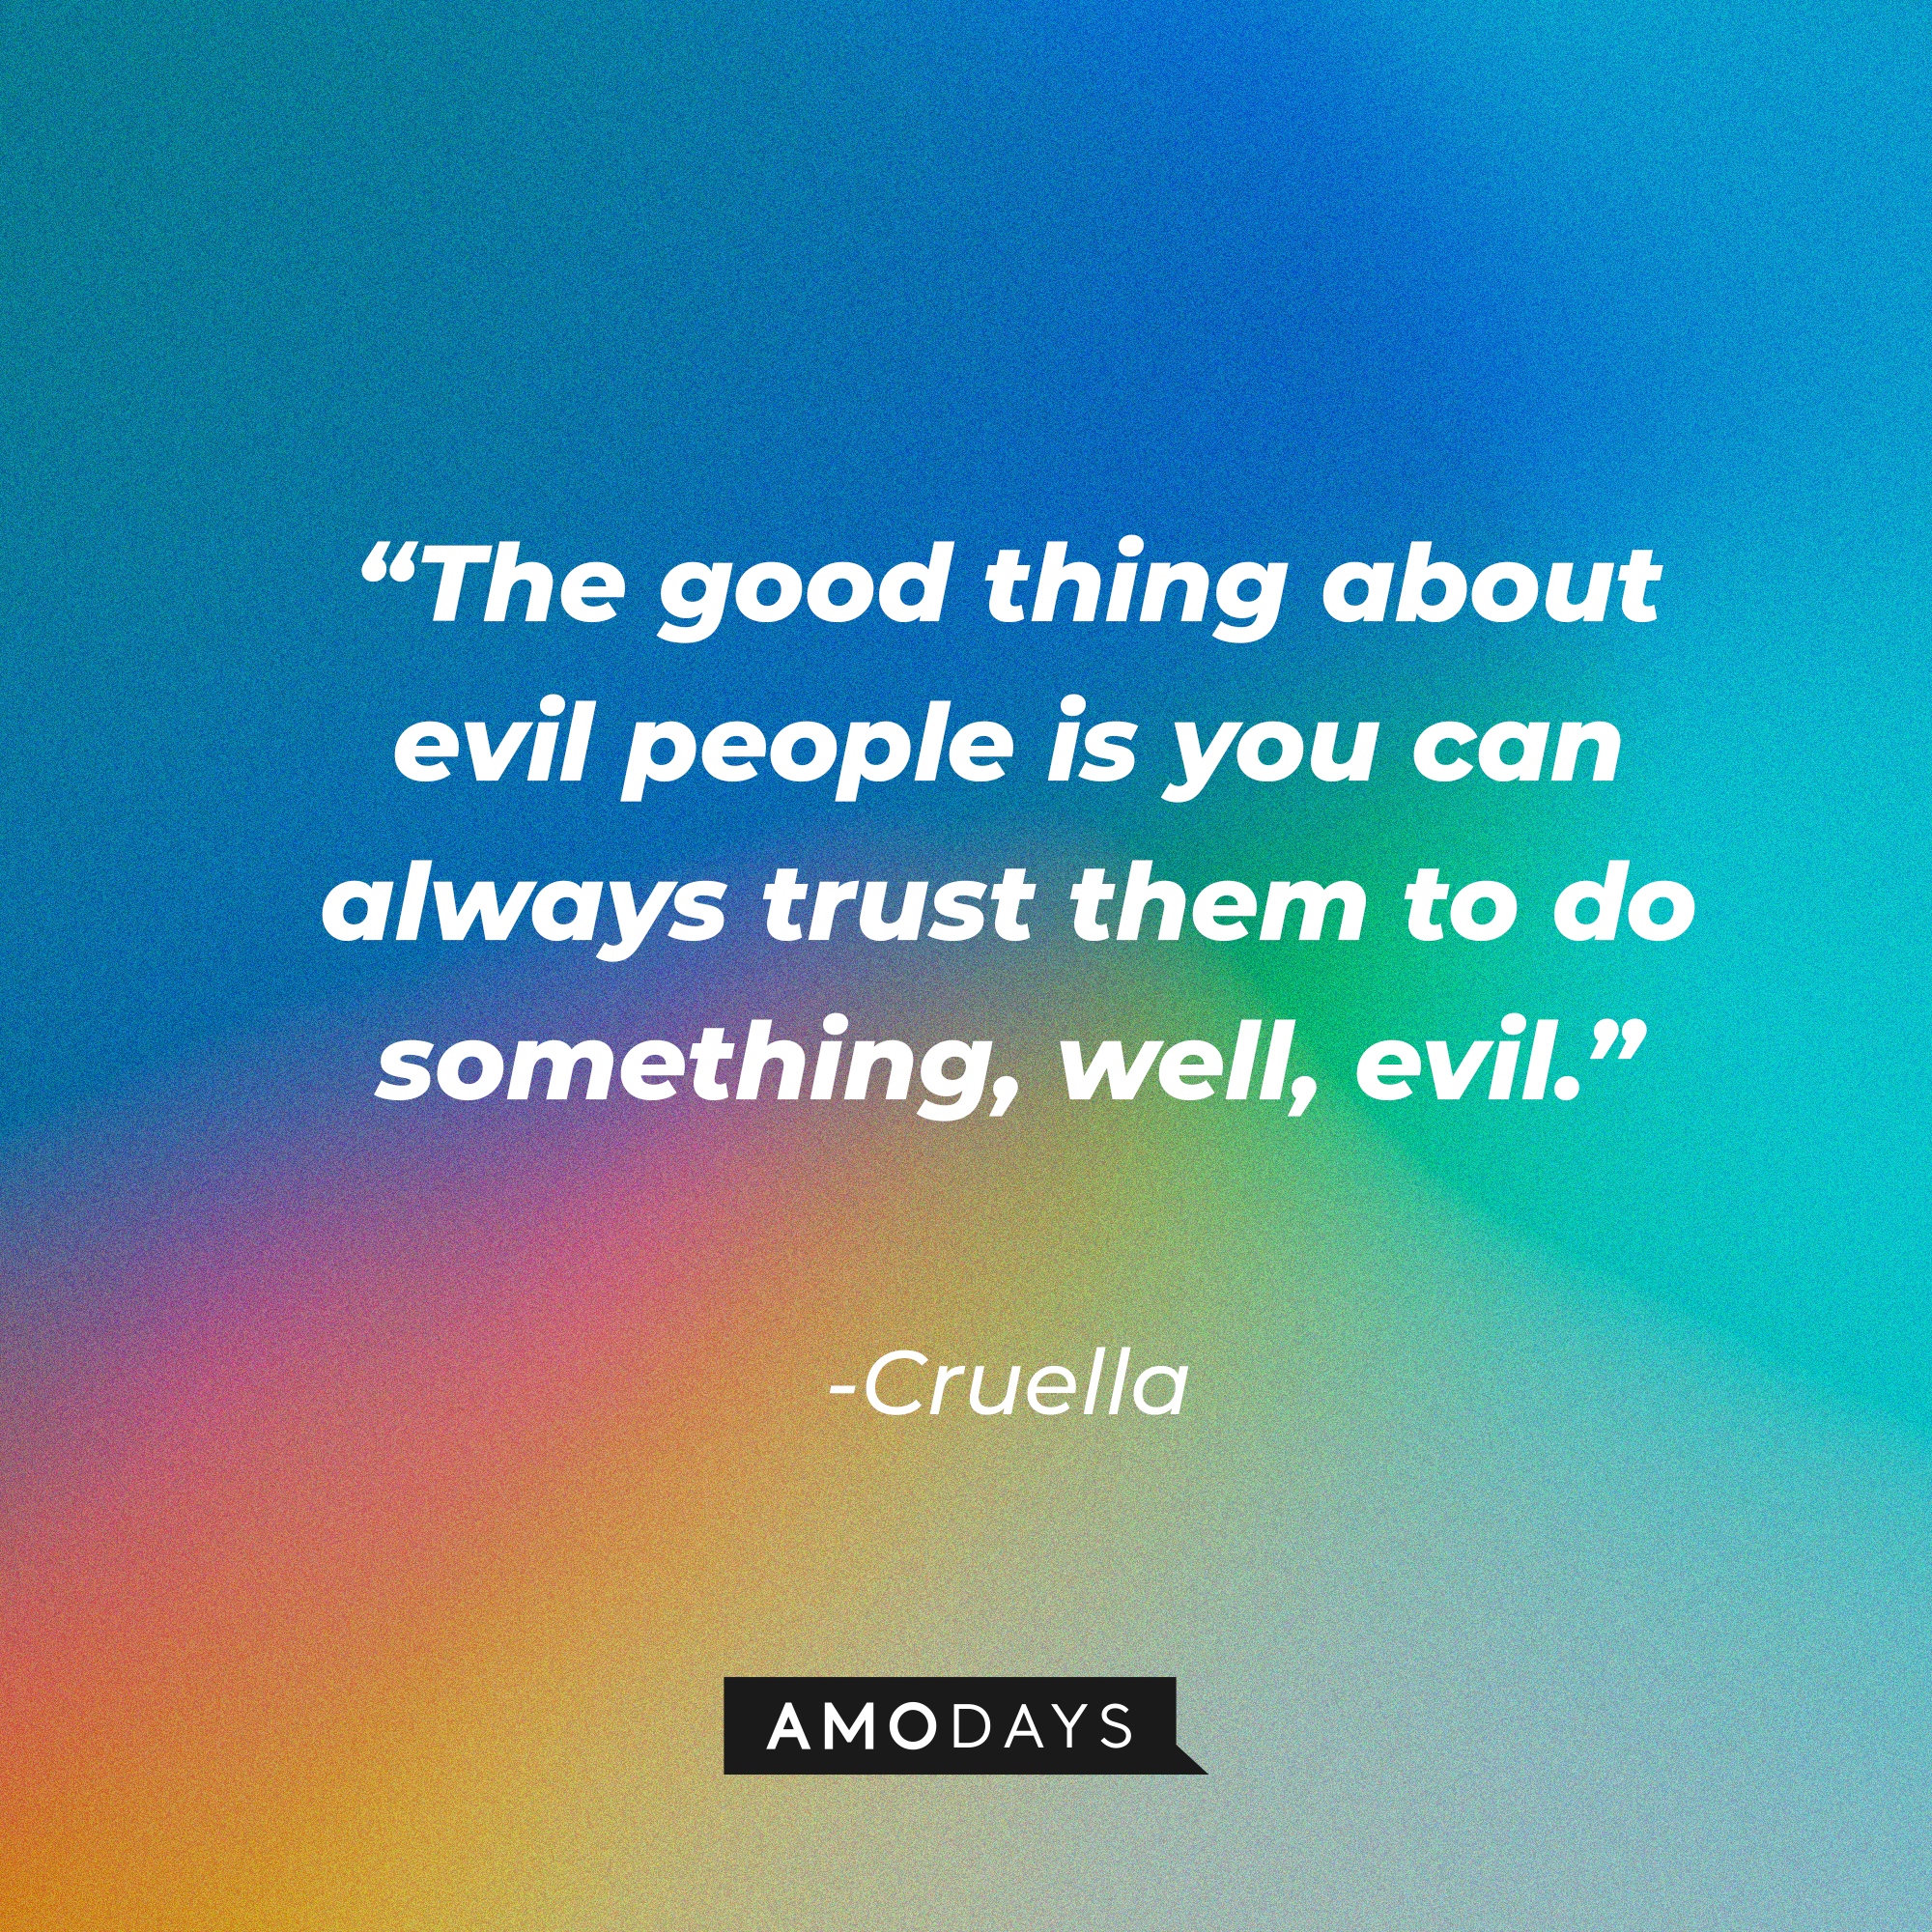 Cruella's quote: “The good thing about evil people is you can always trust them to do something, well, evil.” | Source: Amodays